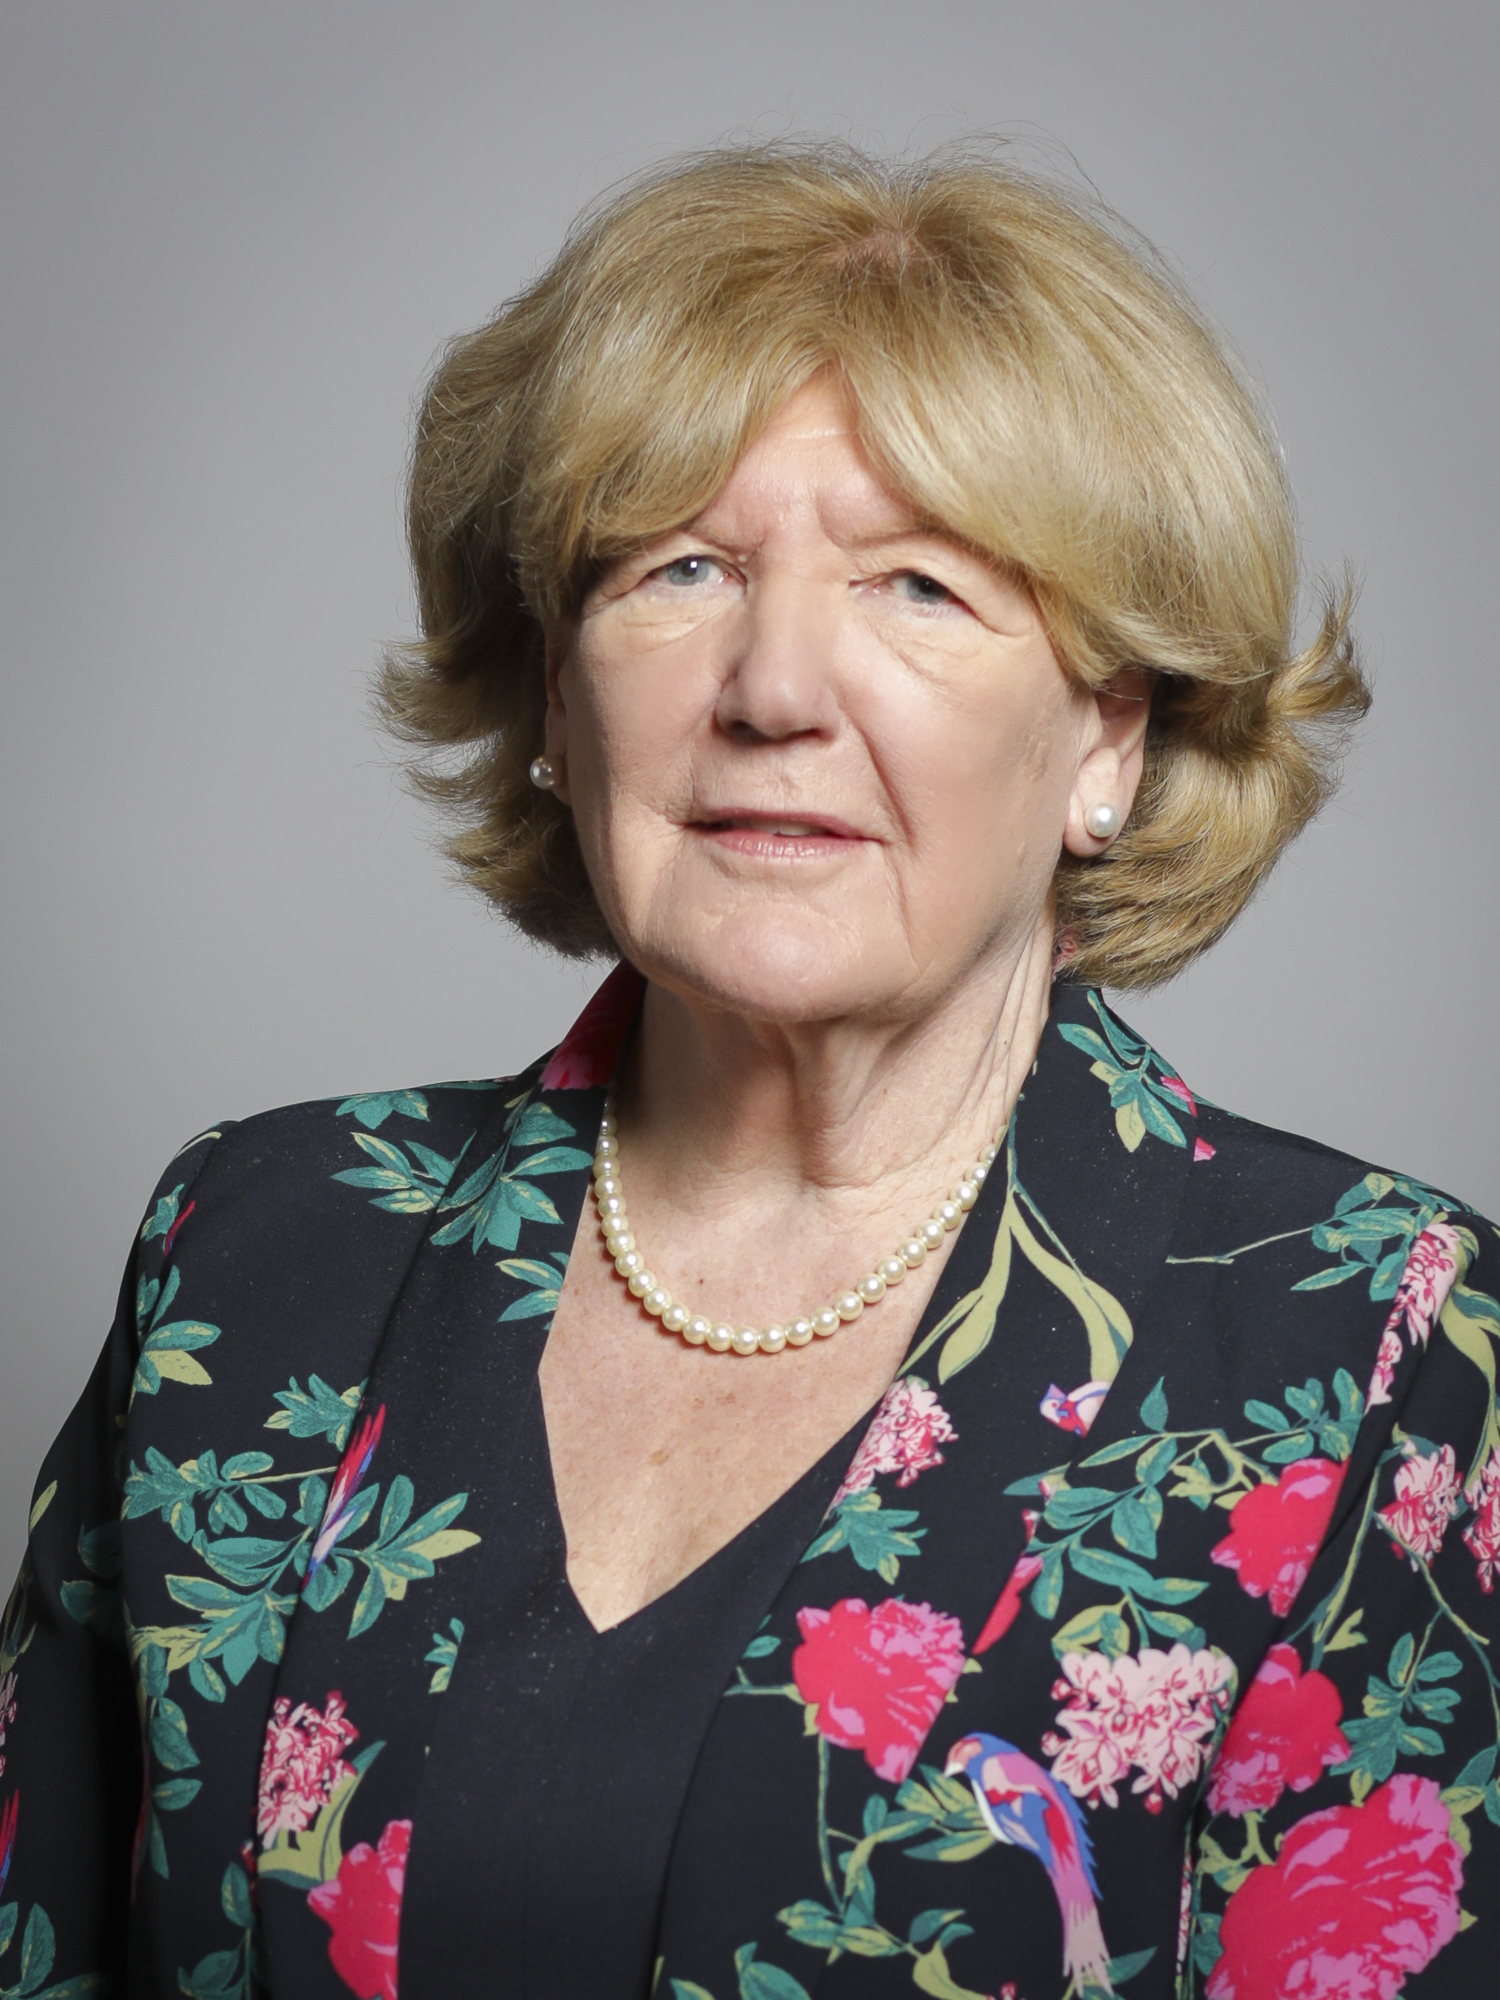 Ann Taylor, Baroness Taylor of Bolton - Wikipedia